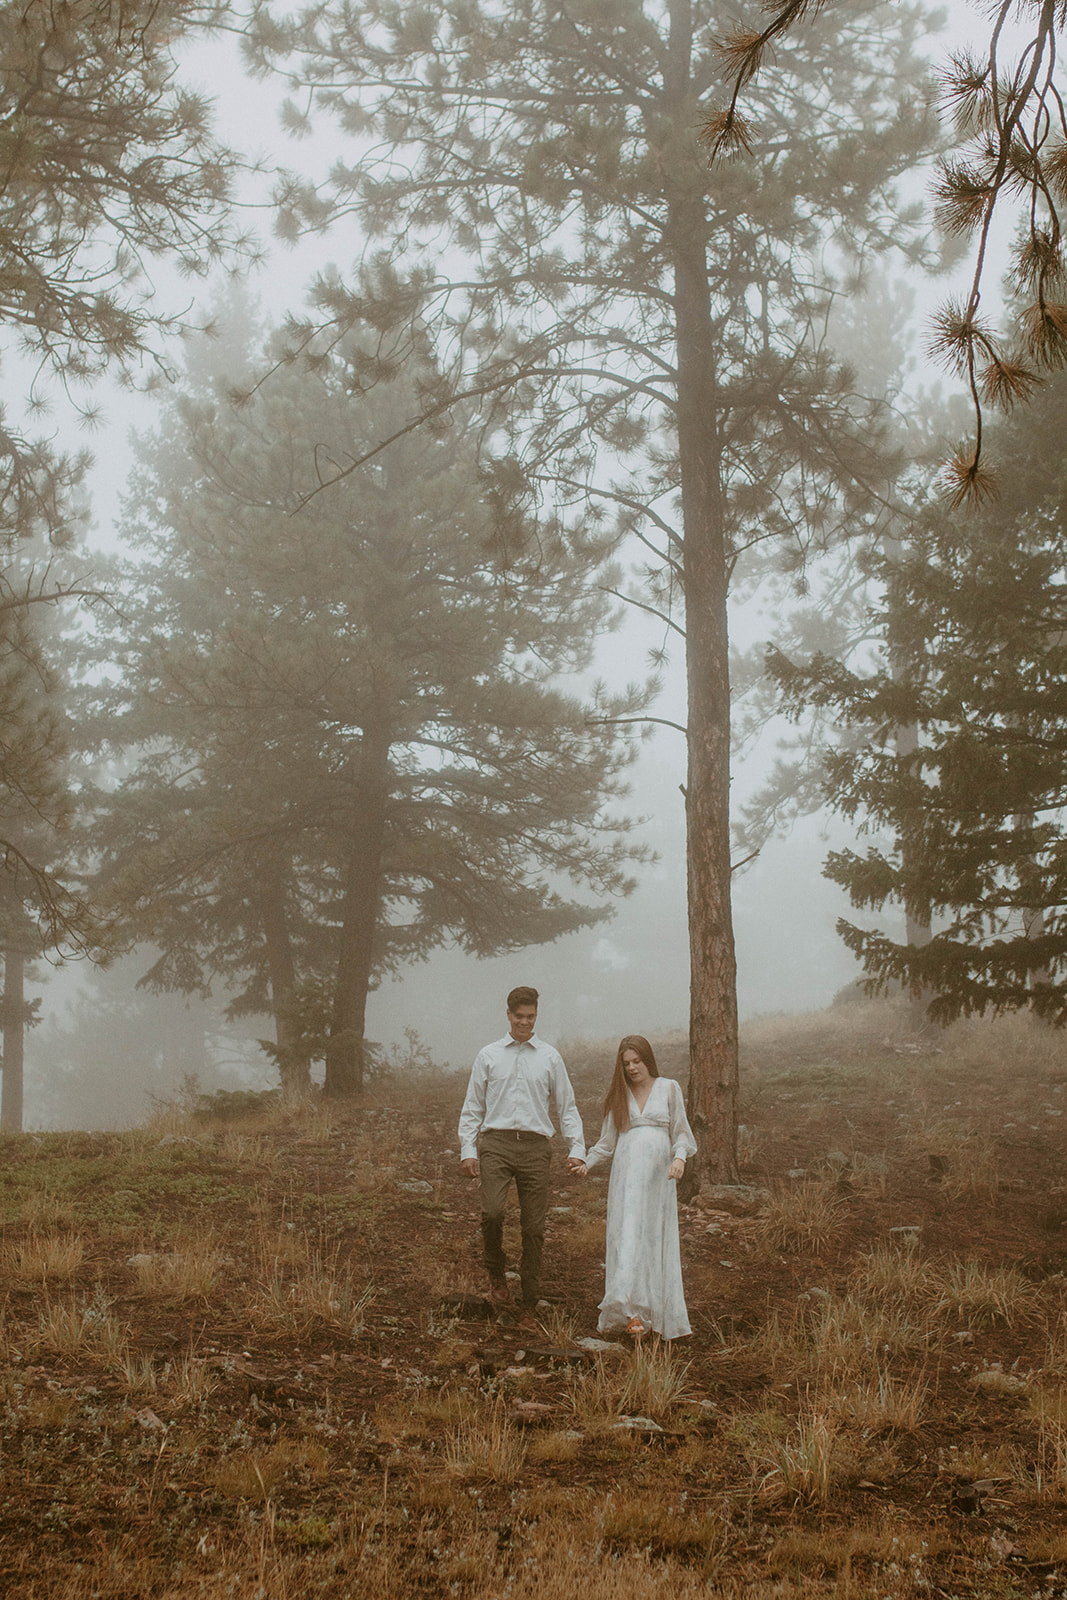 Couple in a misty forest